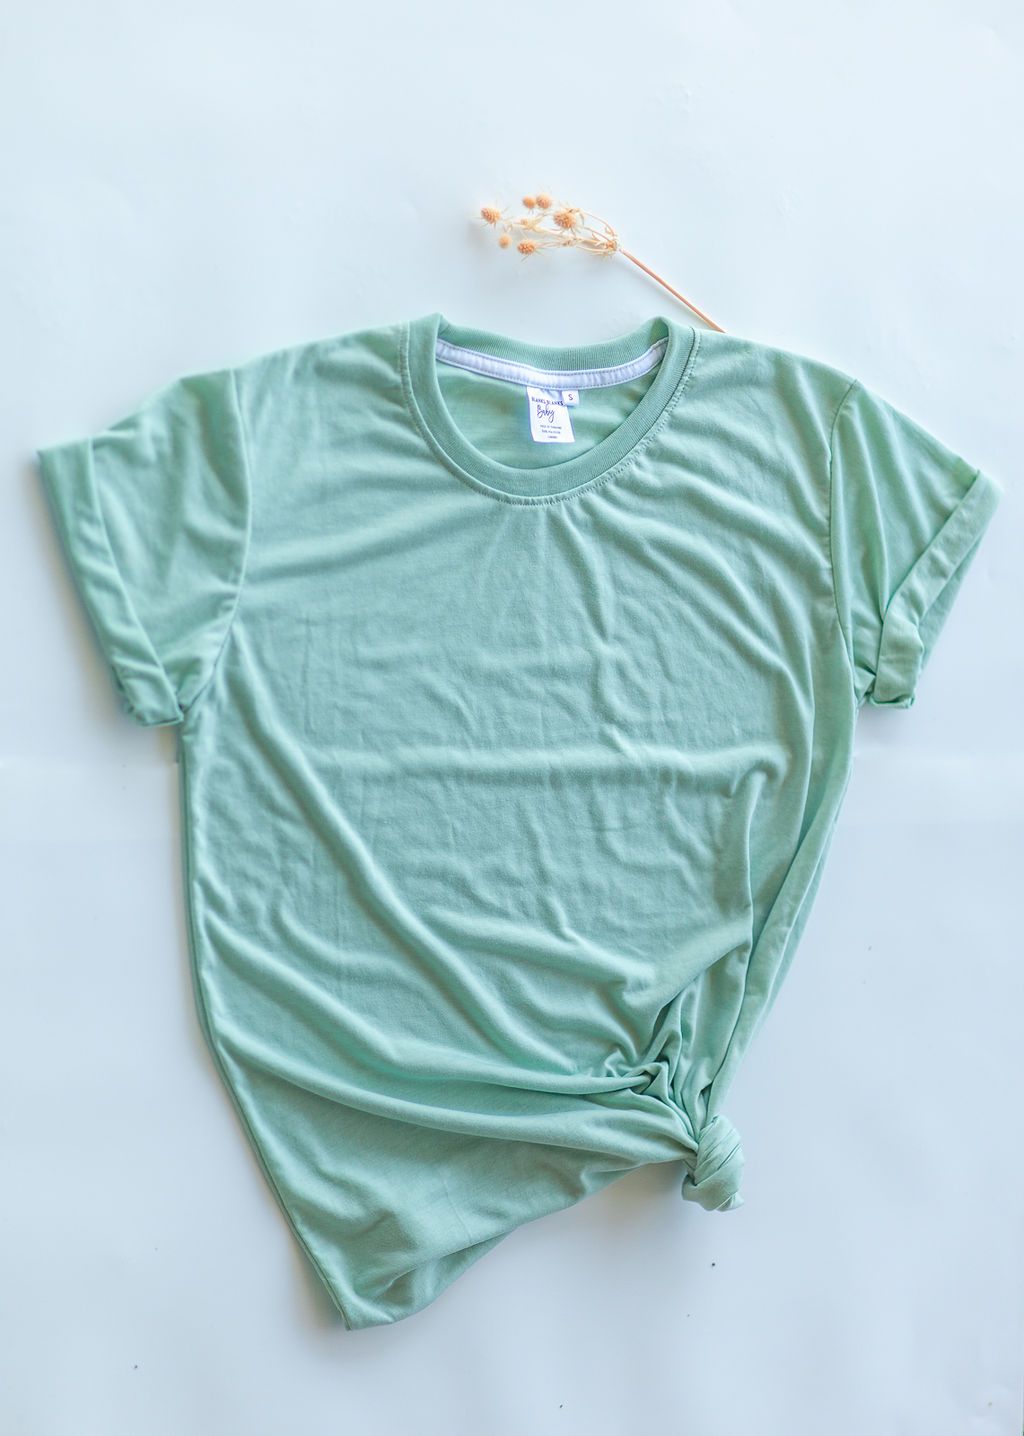 O-Neck Adult T-Shirt - In Stock Small 2Xl Sizes O-Neck T-Shirt